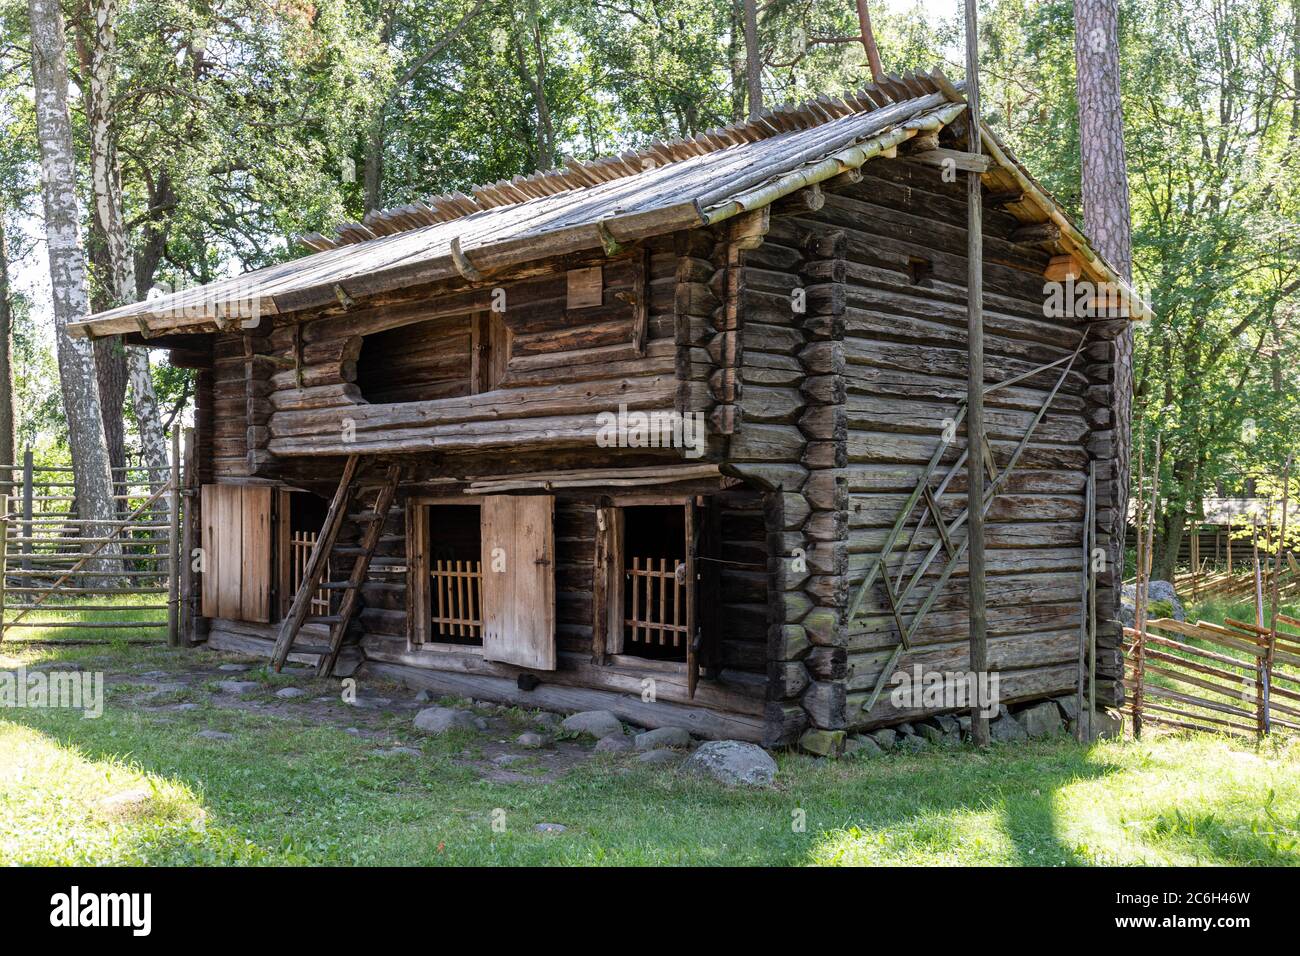 Old agricultural log storehouse of granary from Central Finland in Seurasaari Open-Air Museum in Helsinki, Finland Stock Photo